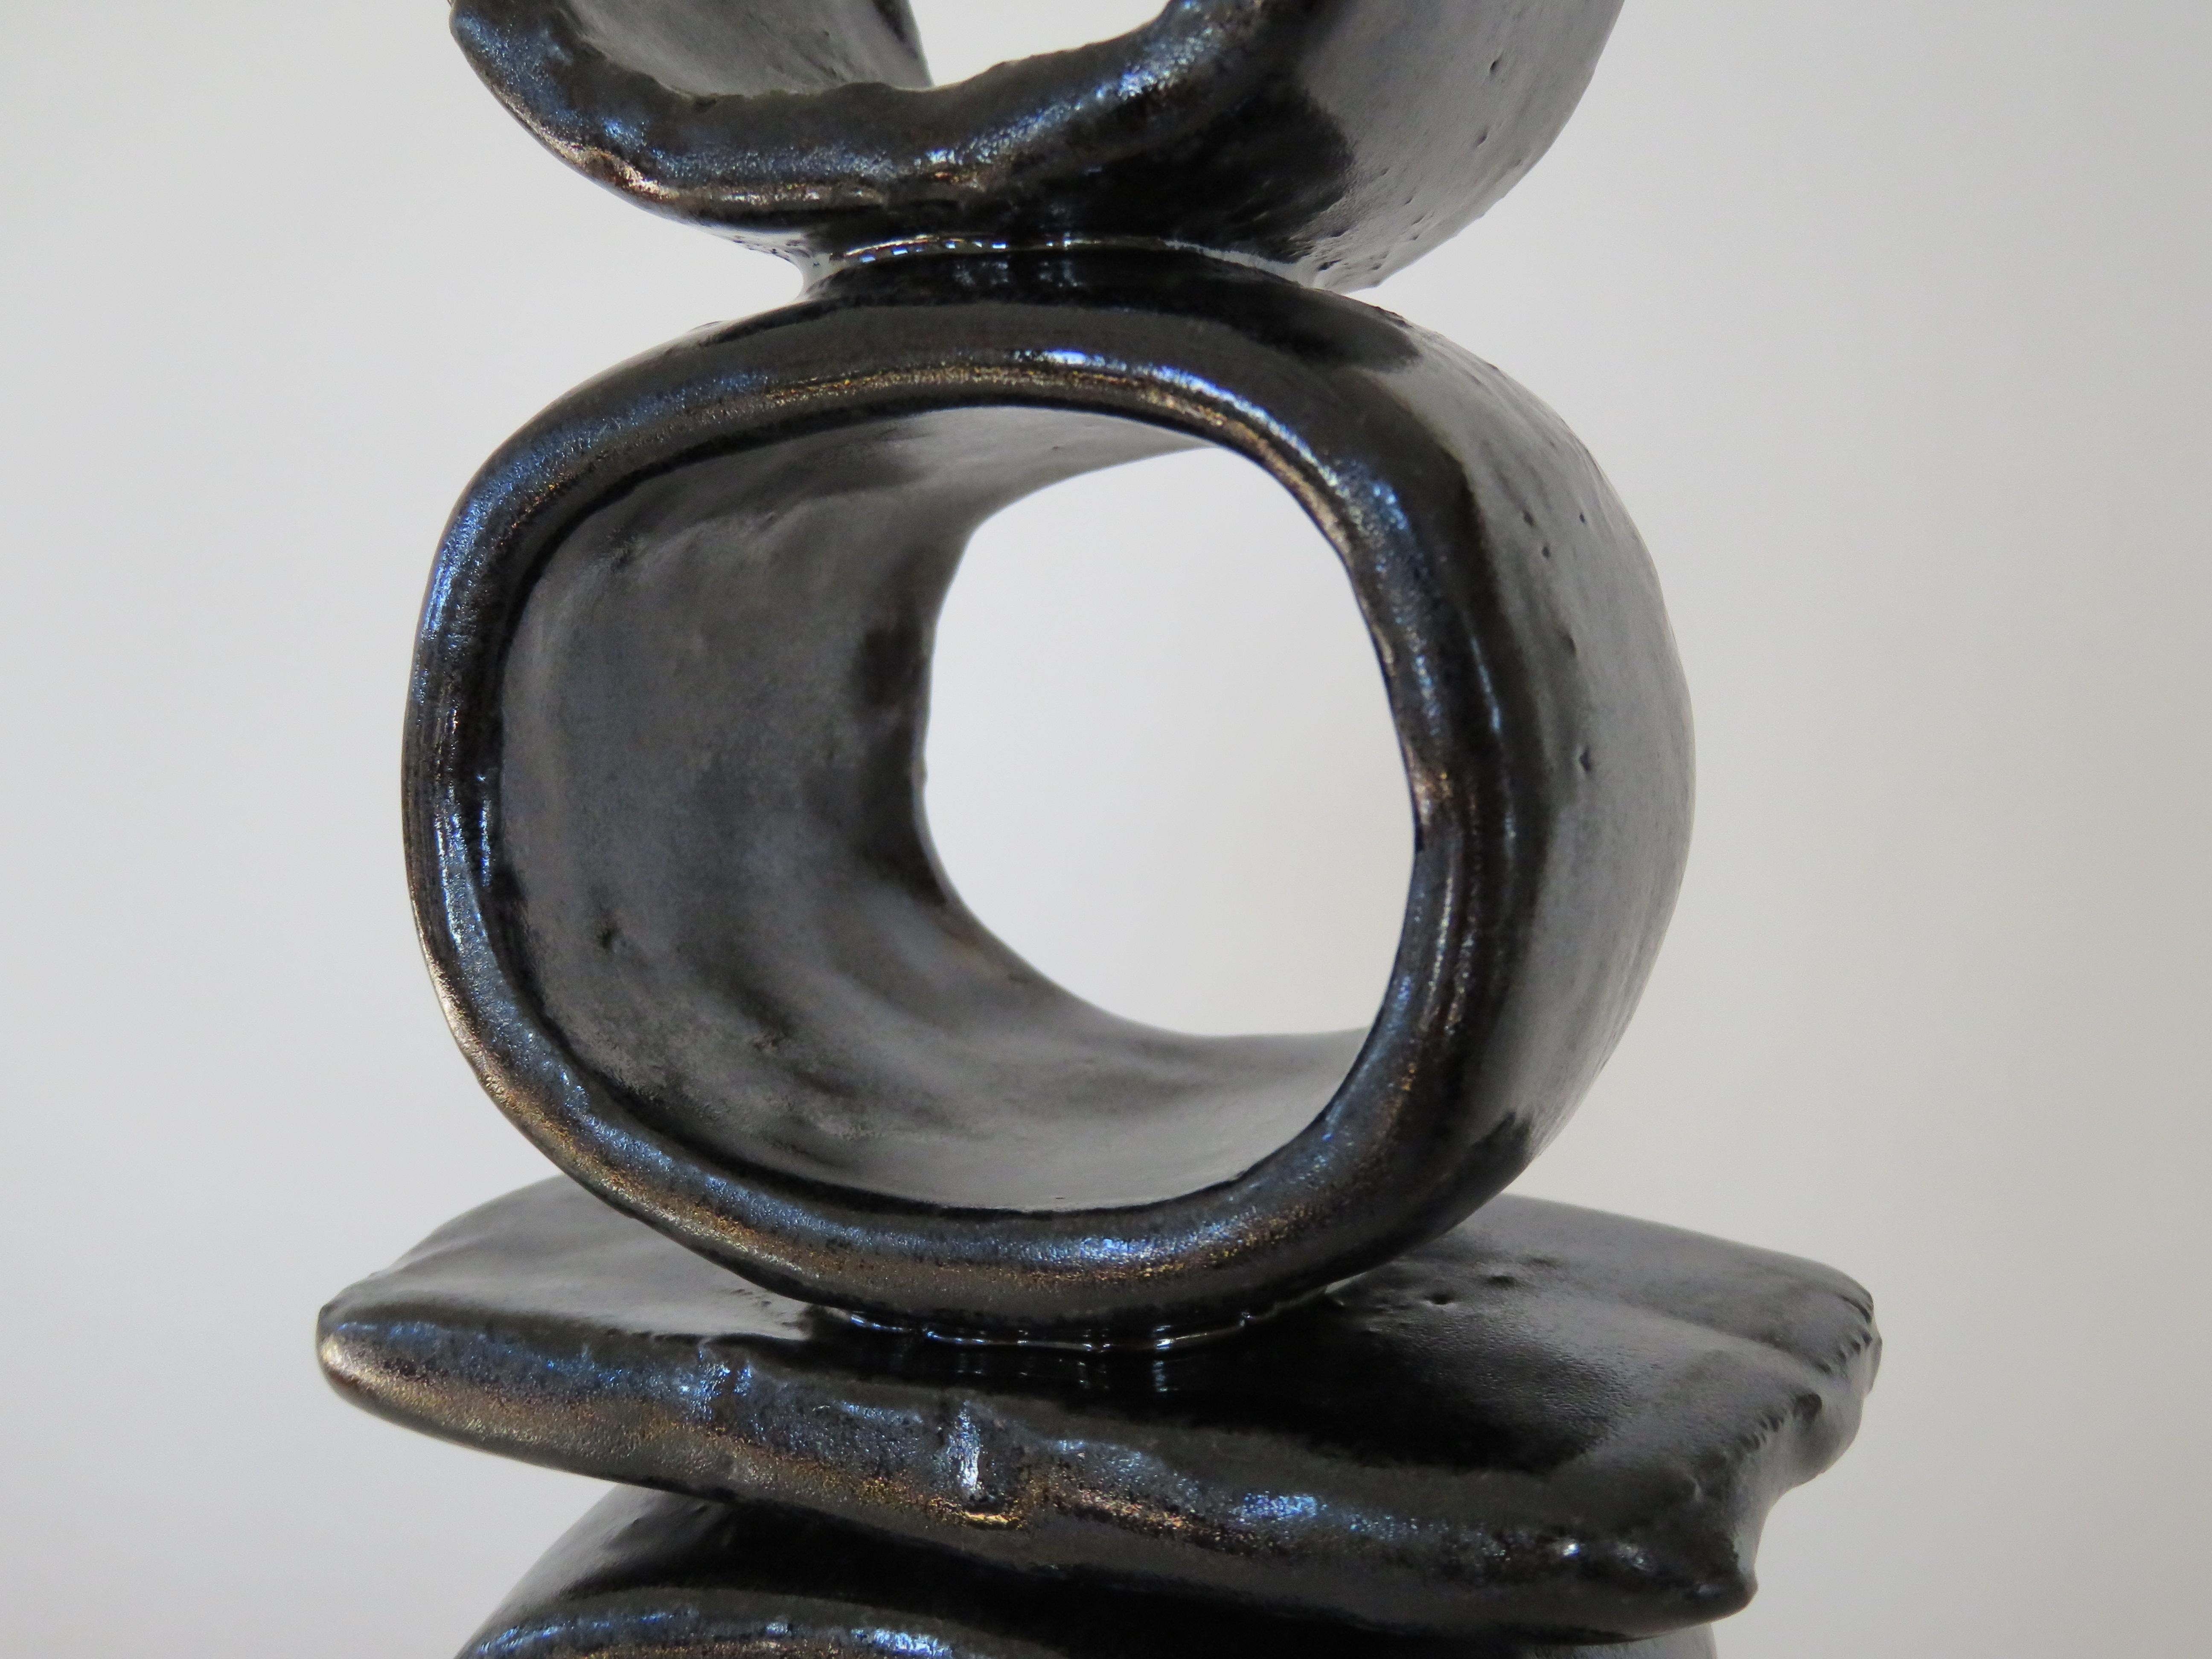 Contemporary Stacked Rings and Bars, Handbuilt Shiny Black Totemic Ceramic Sculpture